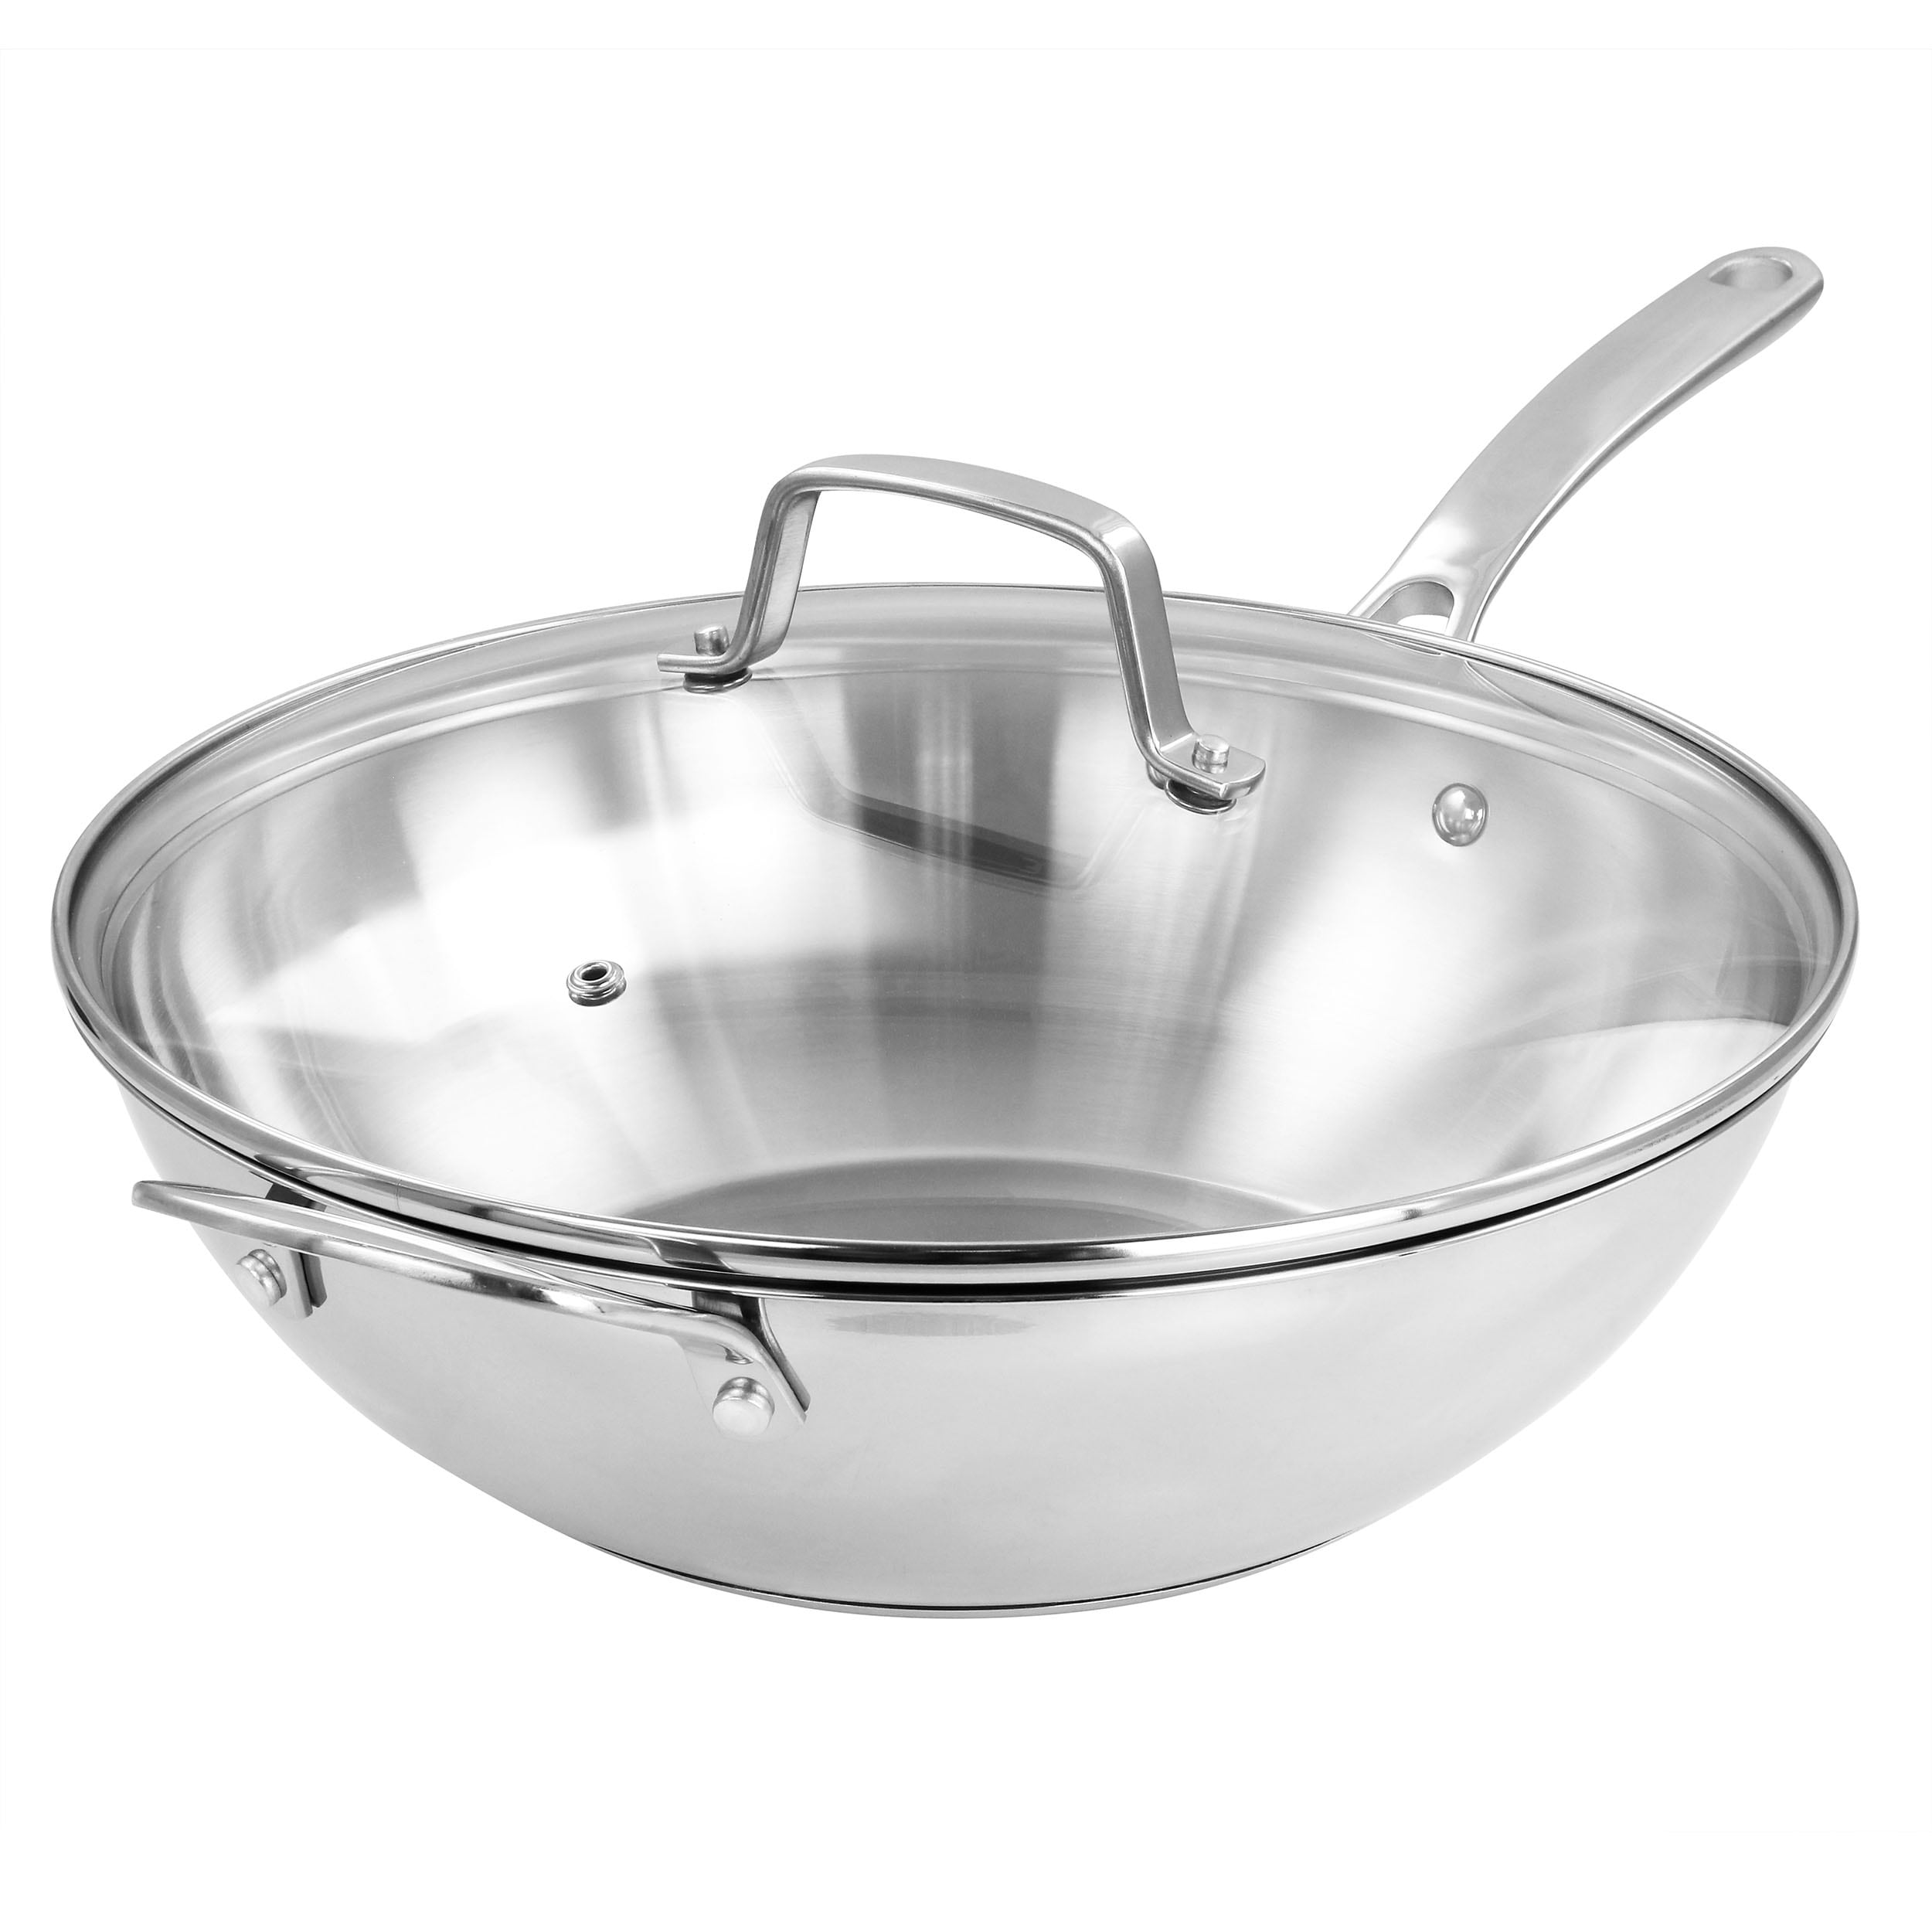 https://ak1.ostkcdn.com/images/products/is/images/direct/041ab77b770856e9093342c7752ea5ec1bd2ef7c/Martha-Stewart-Stainless-Steel-Essential-12-Inch-Pan-with-Lid.jpg